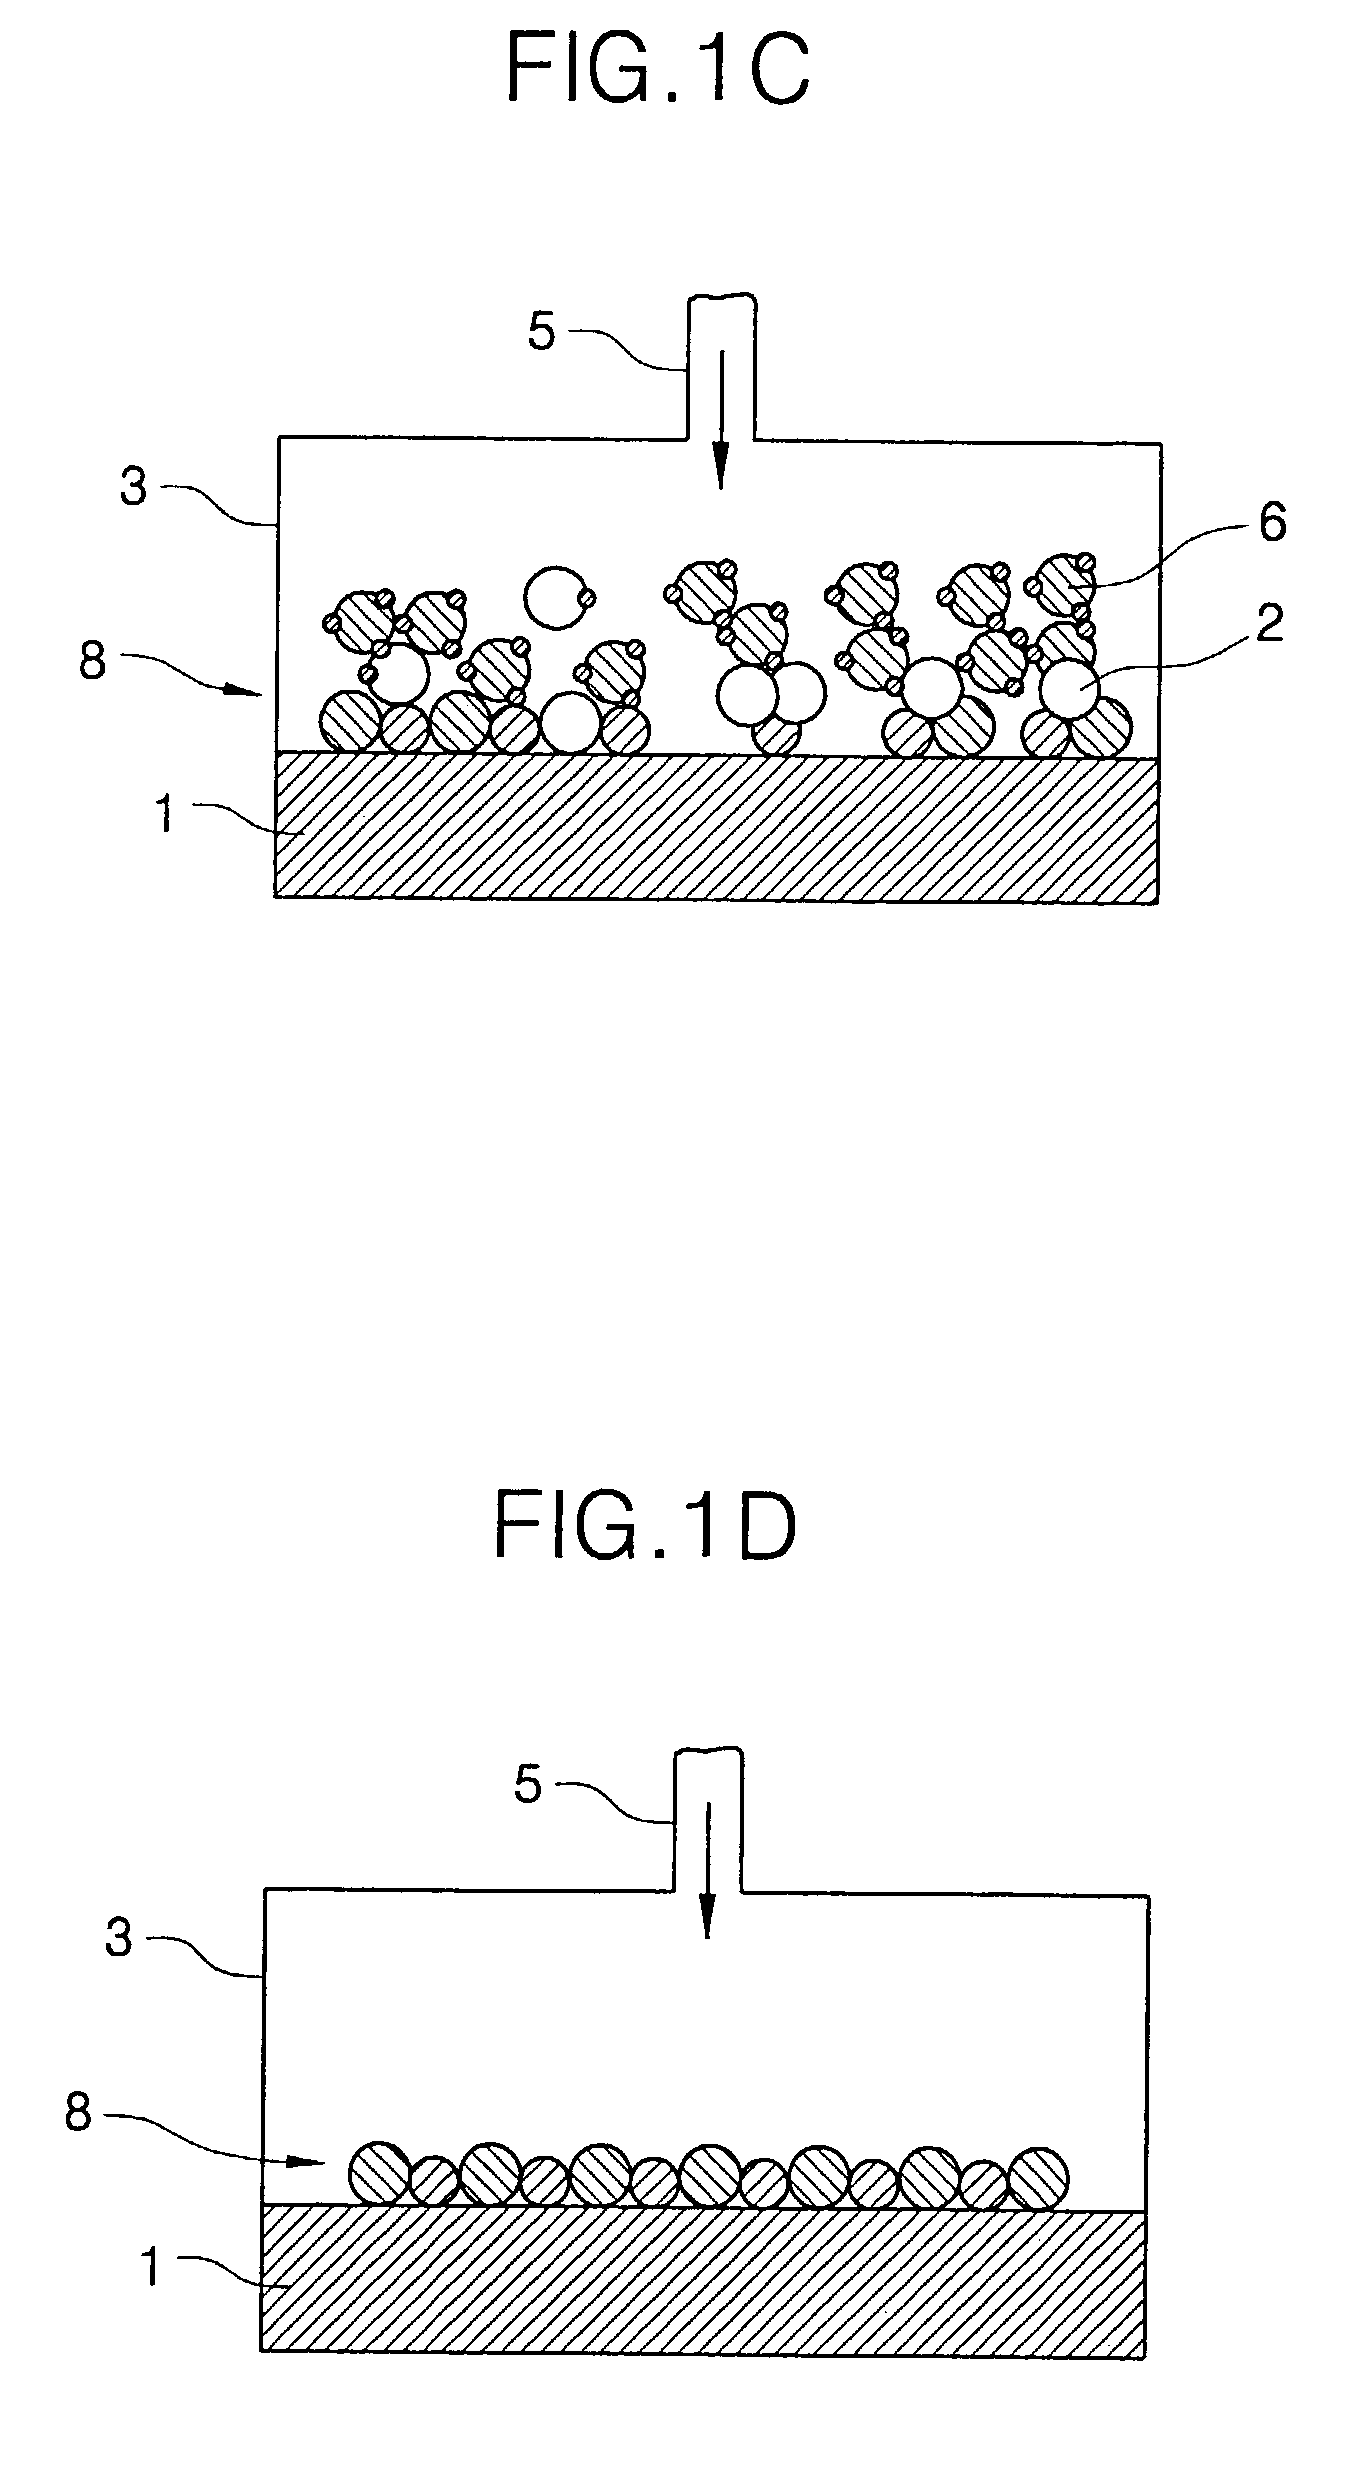 Methods of forming atomic layers of a material on a substrate by sequentially introducing precursors of the material